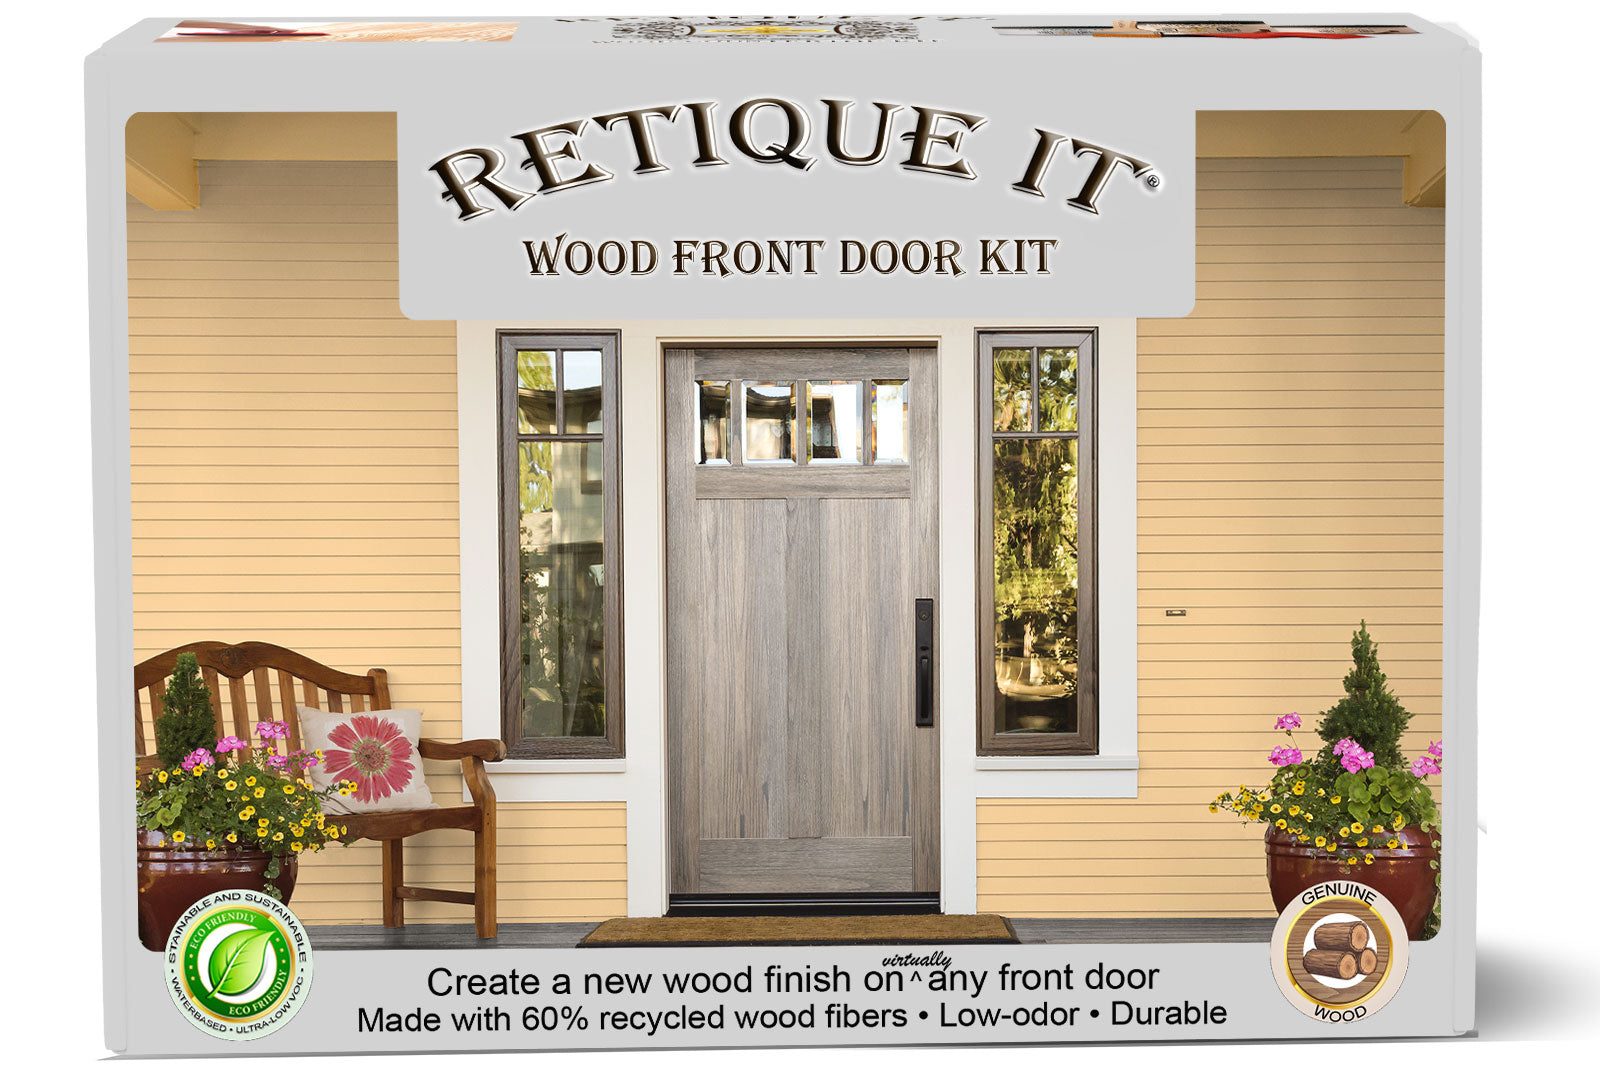 Wood'n Finish Kits - Step-by-Step Instructions